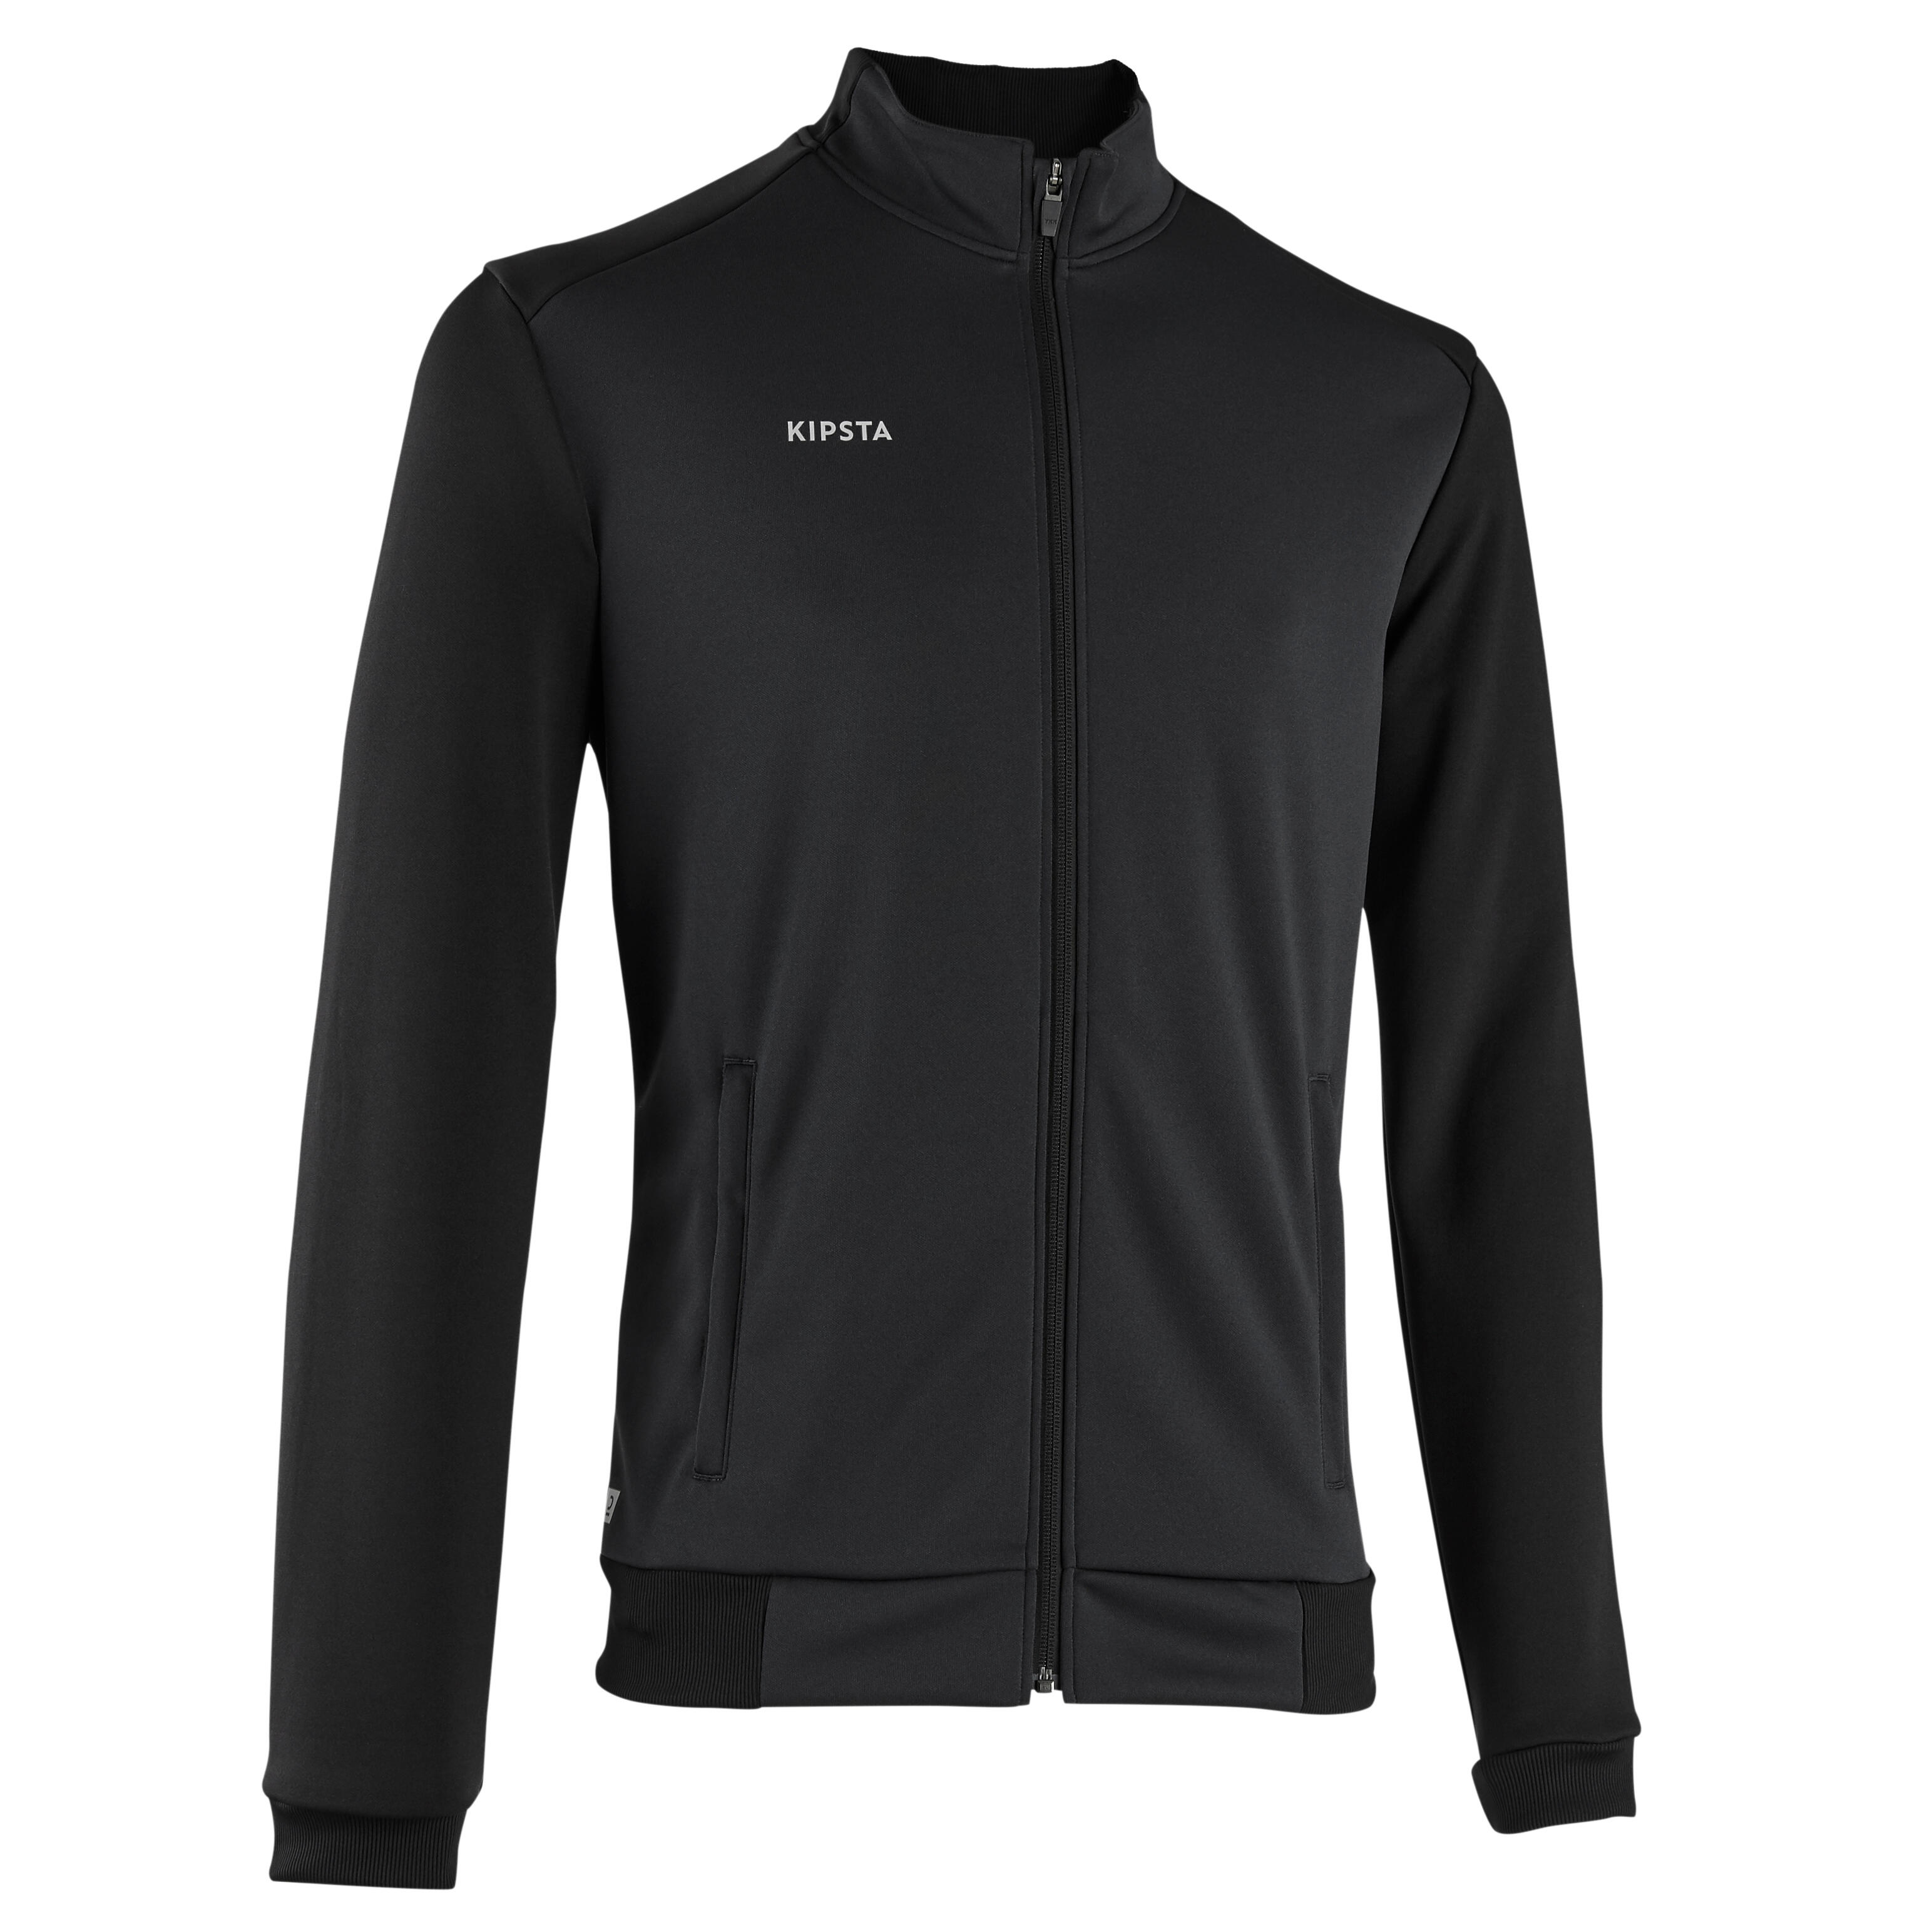 Meet the new WATERPROOF CYCLING CLOTHING l DECATHLON RIVERSIDE - YouTube